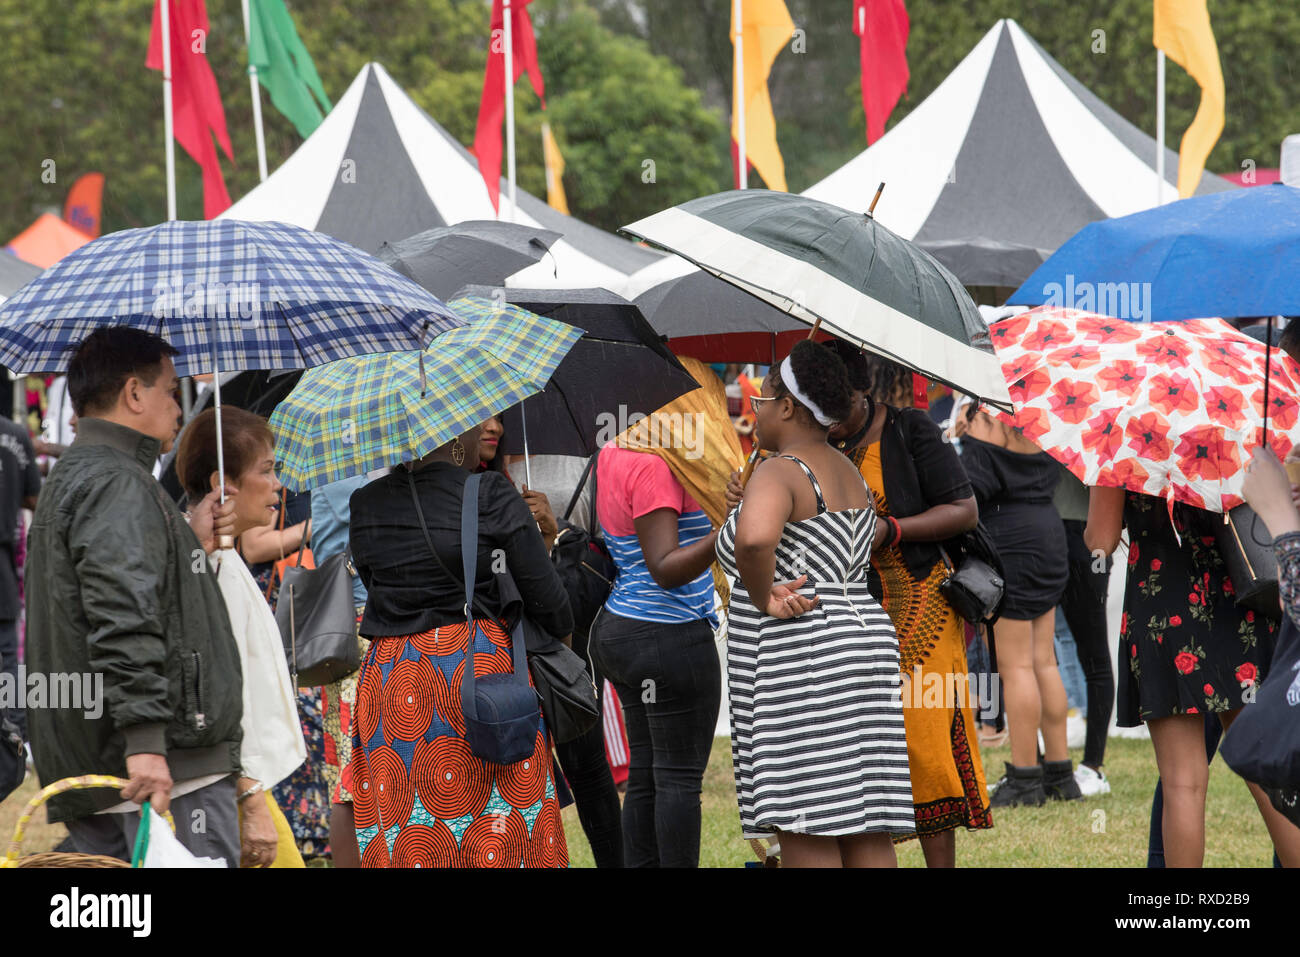 9th Mar 2019, Multicultural Australia was on show today at the Africultures Festival held in Wyatt Park, Lidcombe, Sydney Australia. Stock Photo